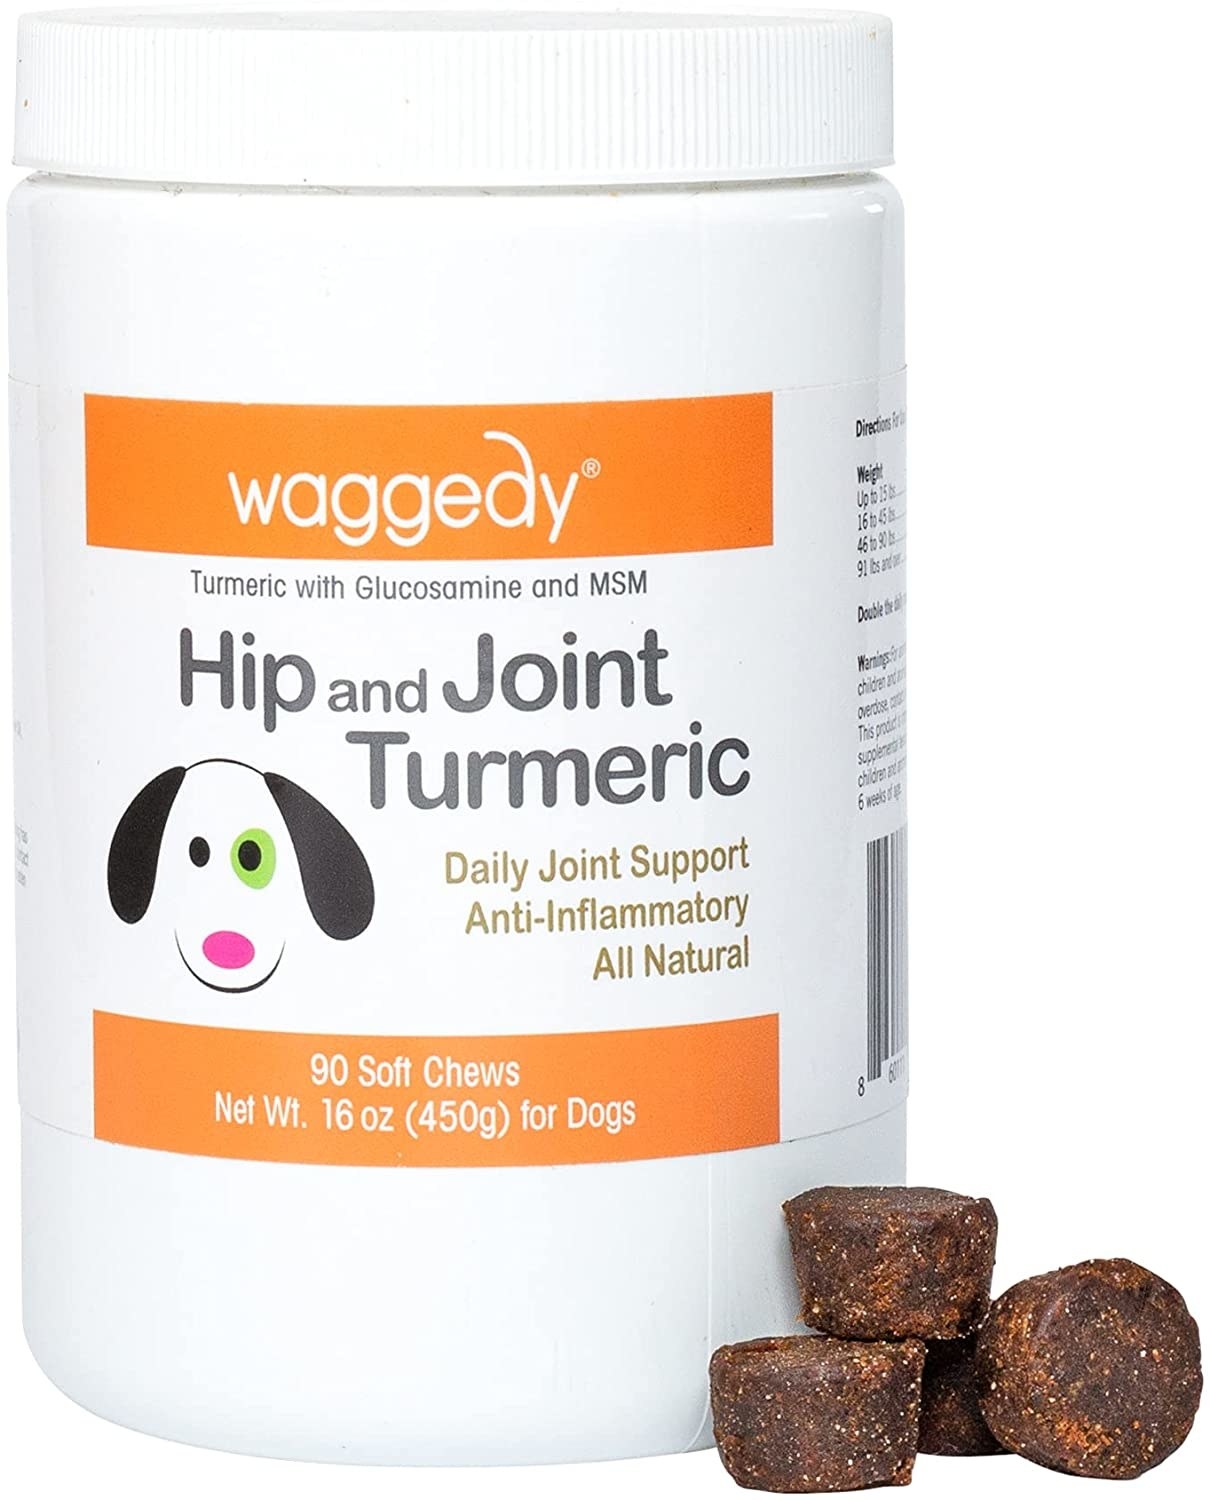 A tub with the product label, &quot;Hip and Joint Turmeric&quot;, and four treats next to it